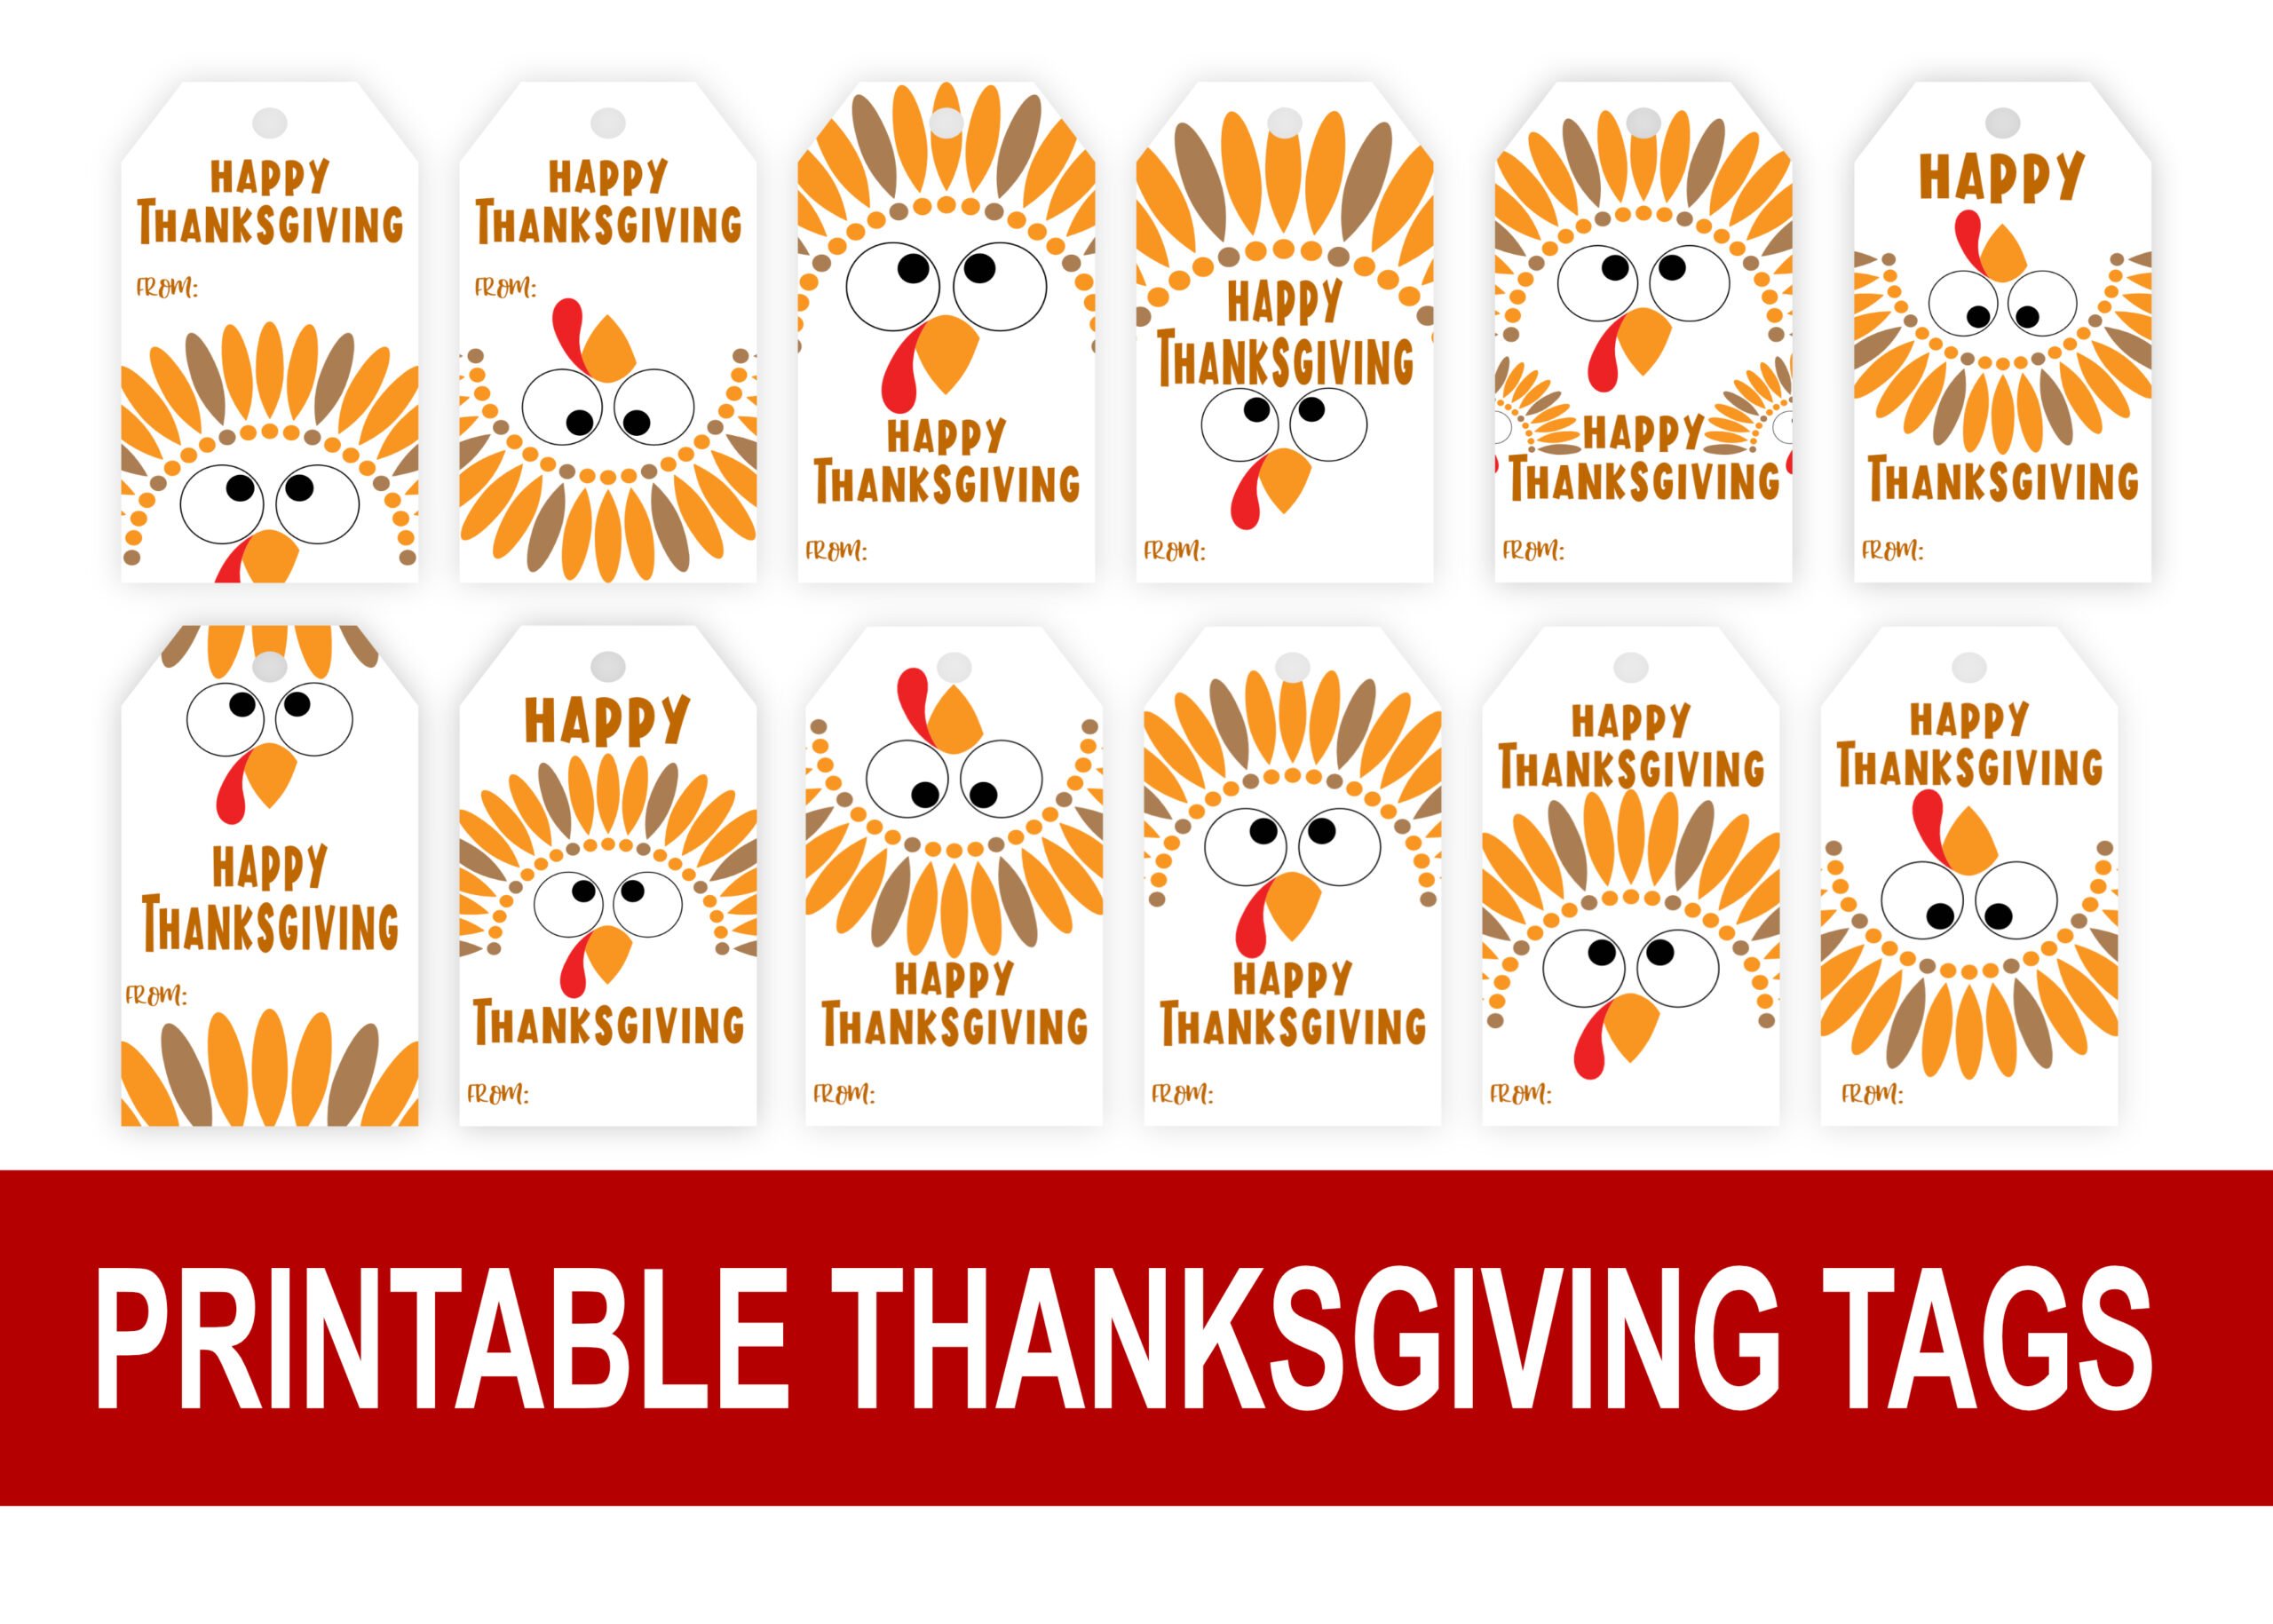 happy-thanksgiving-tags-printables-depot